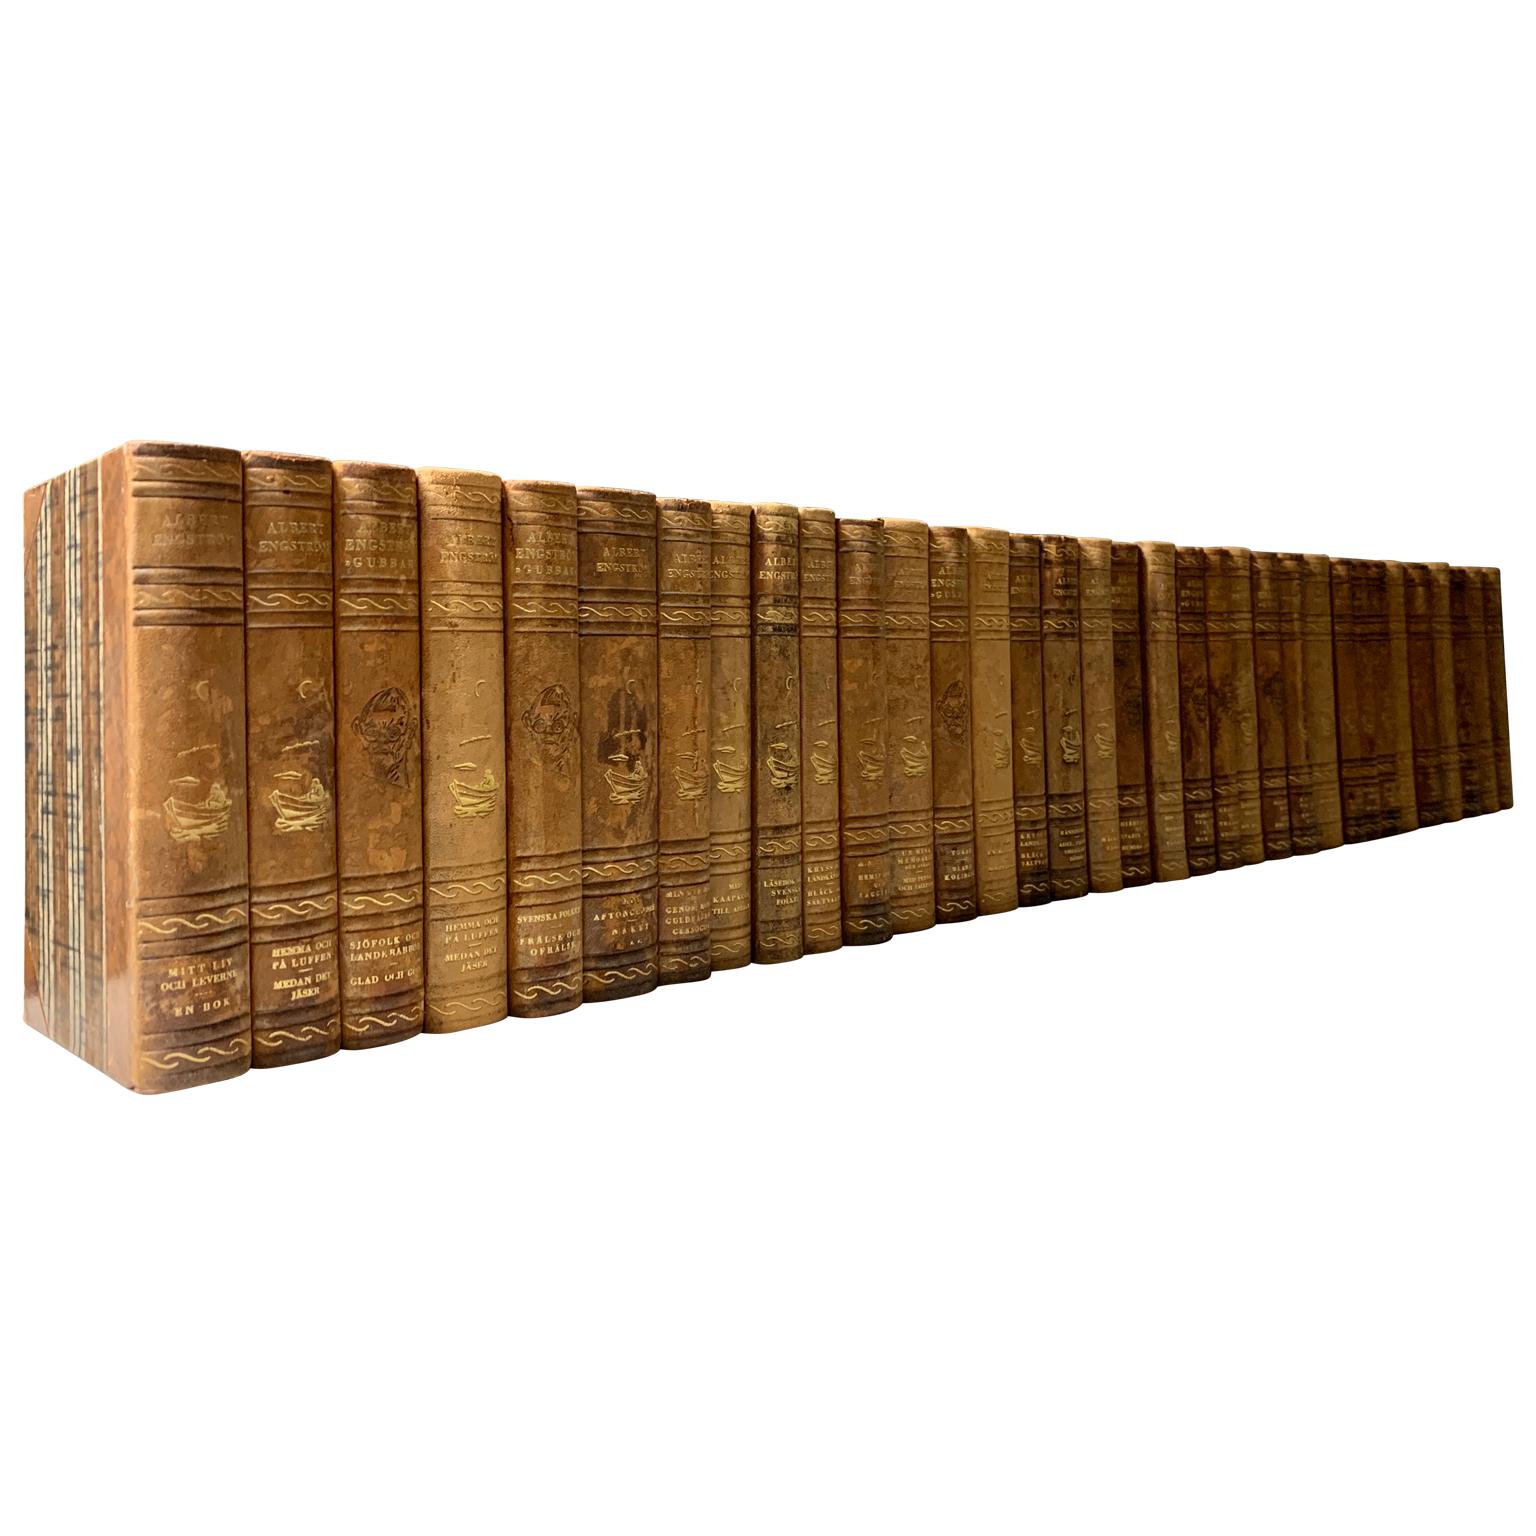 A collection of 34 Swedish decorative antique leather-bound library books.
The books are wrapped in leather-bound covers, comprised of a selection of warm tones and gold leaf print embossing.
The book collection measure horizontally is 1,04 m,